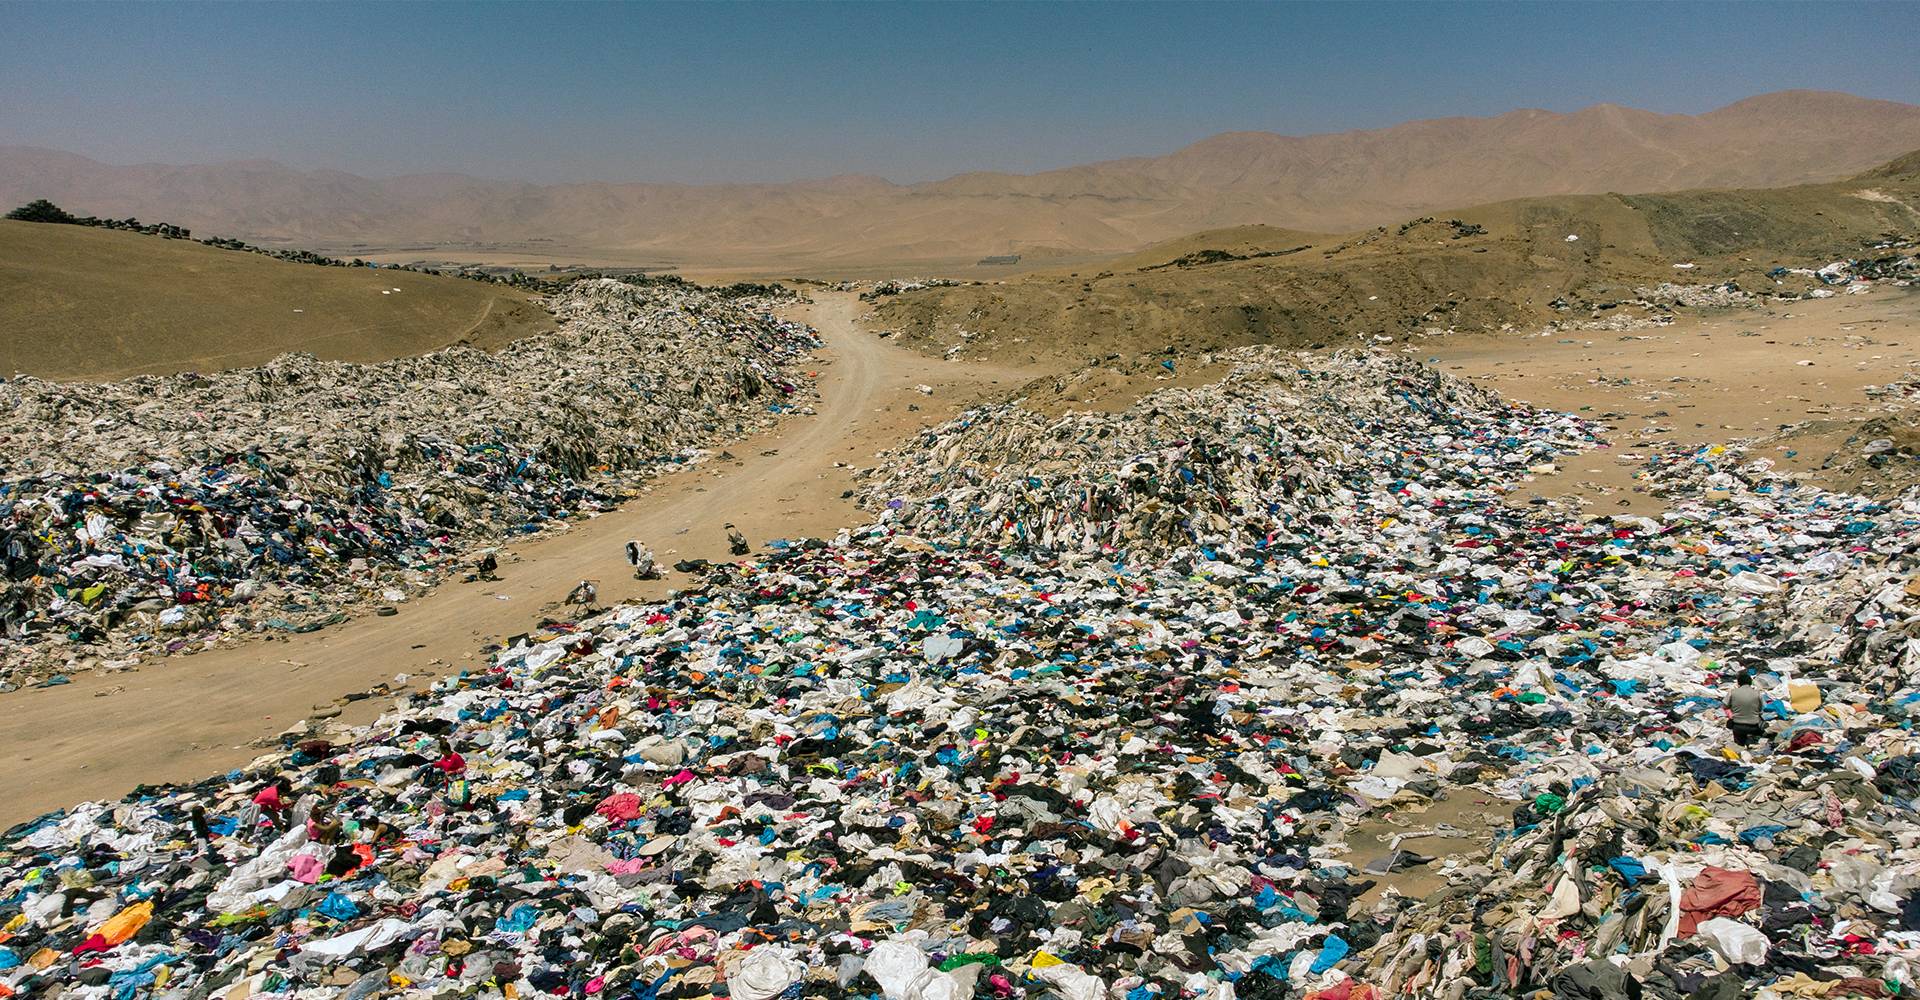 Every second, a truckload of clothes are destroyed. How do we prevent this happening?